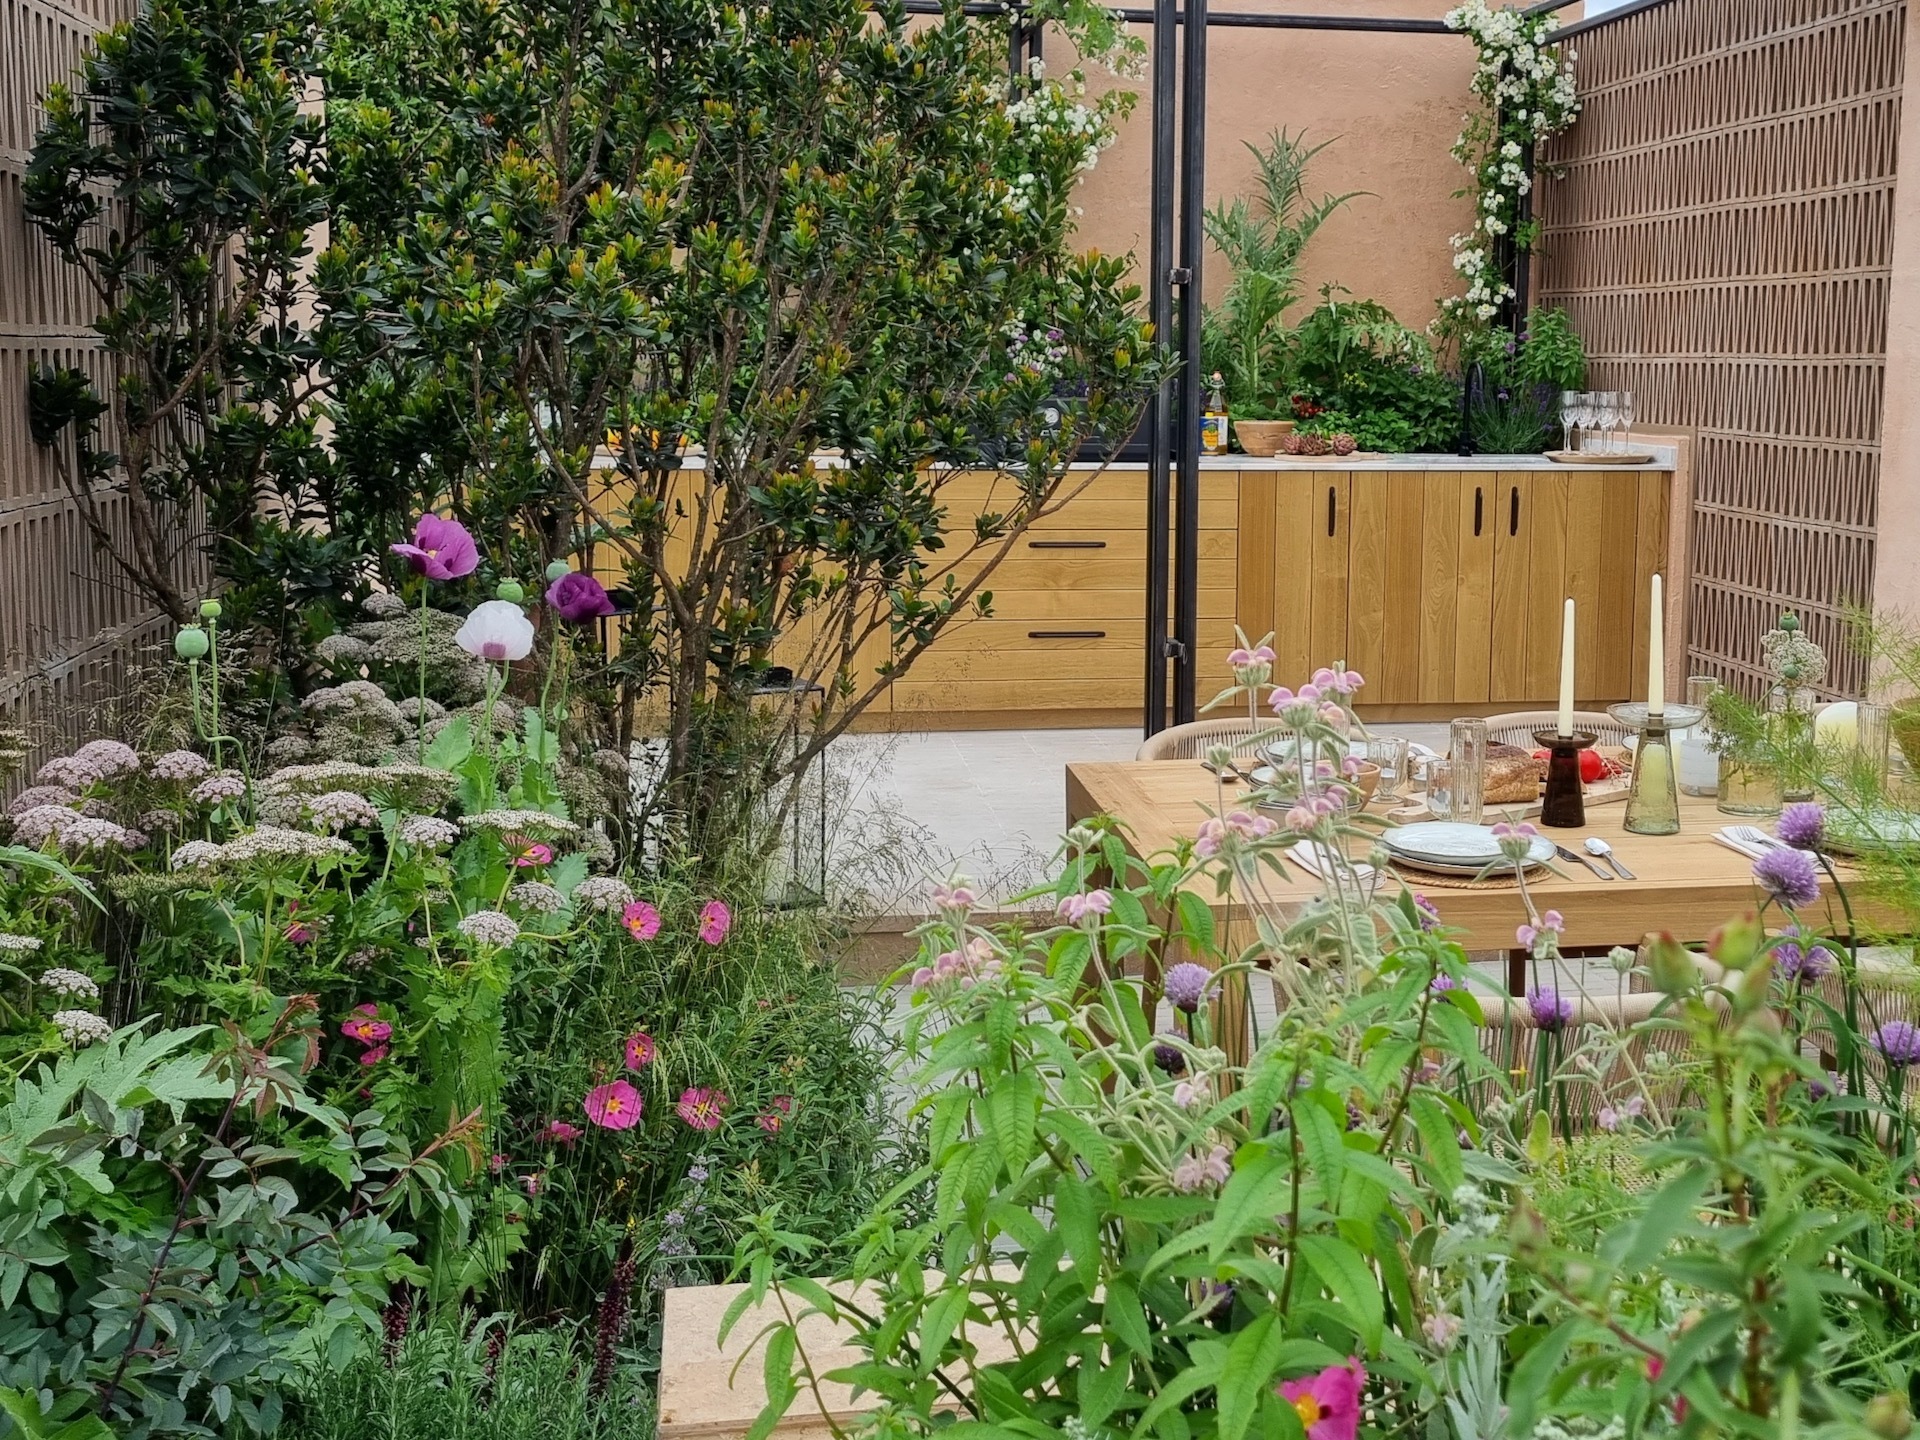 Garden kitchen and dining area surrounded by planting